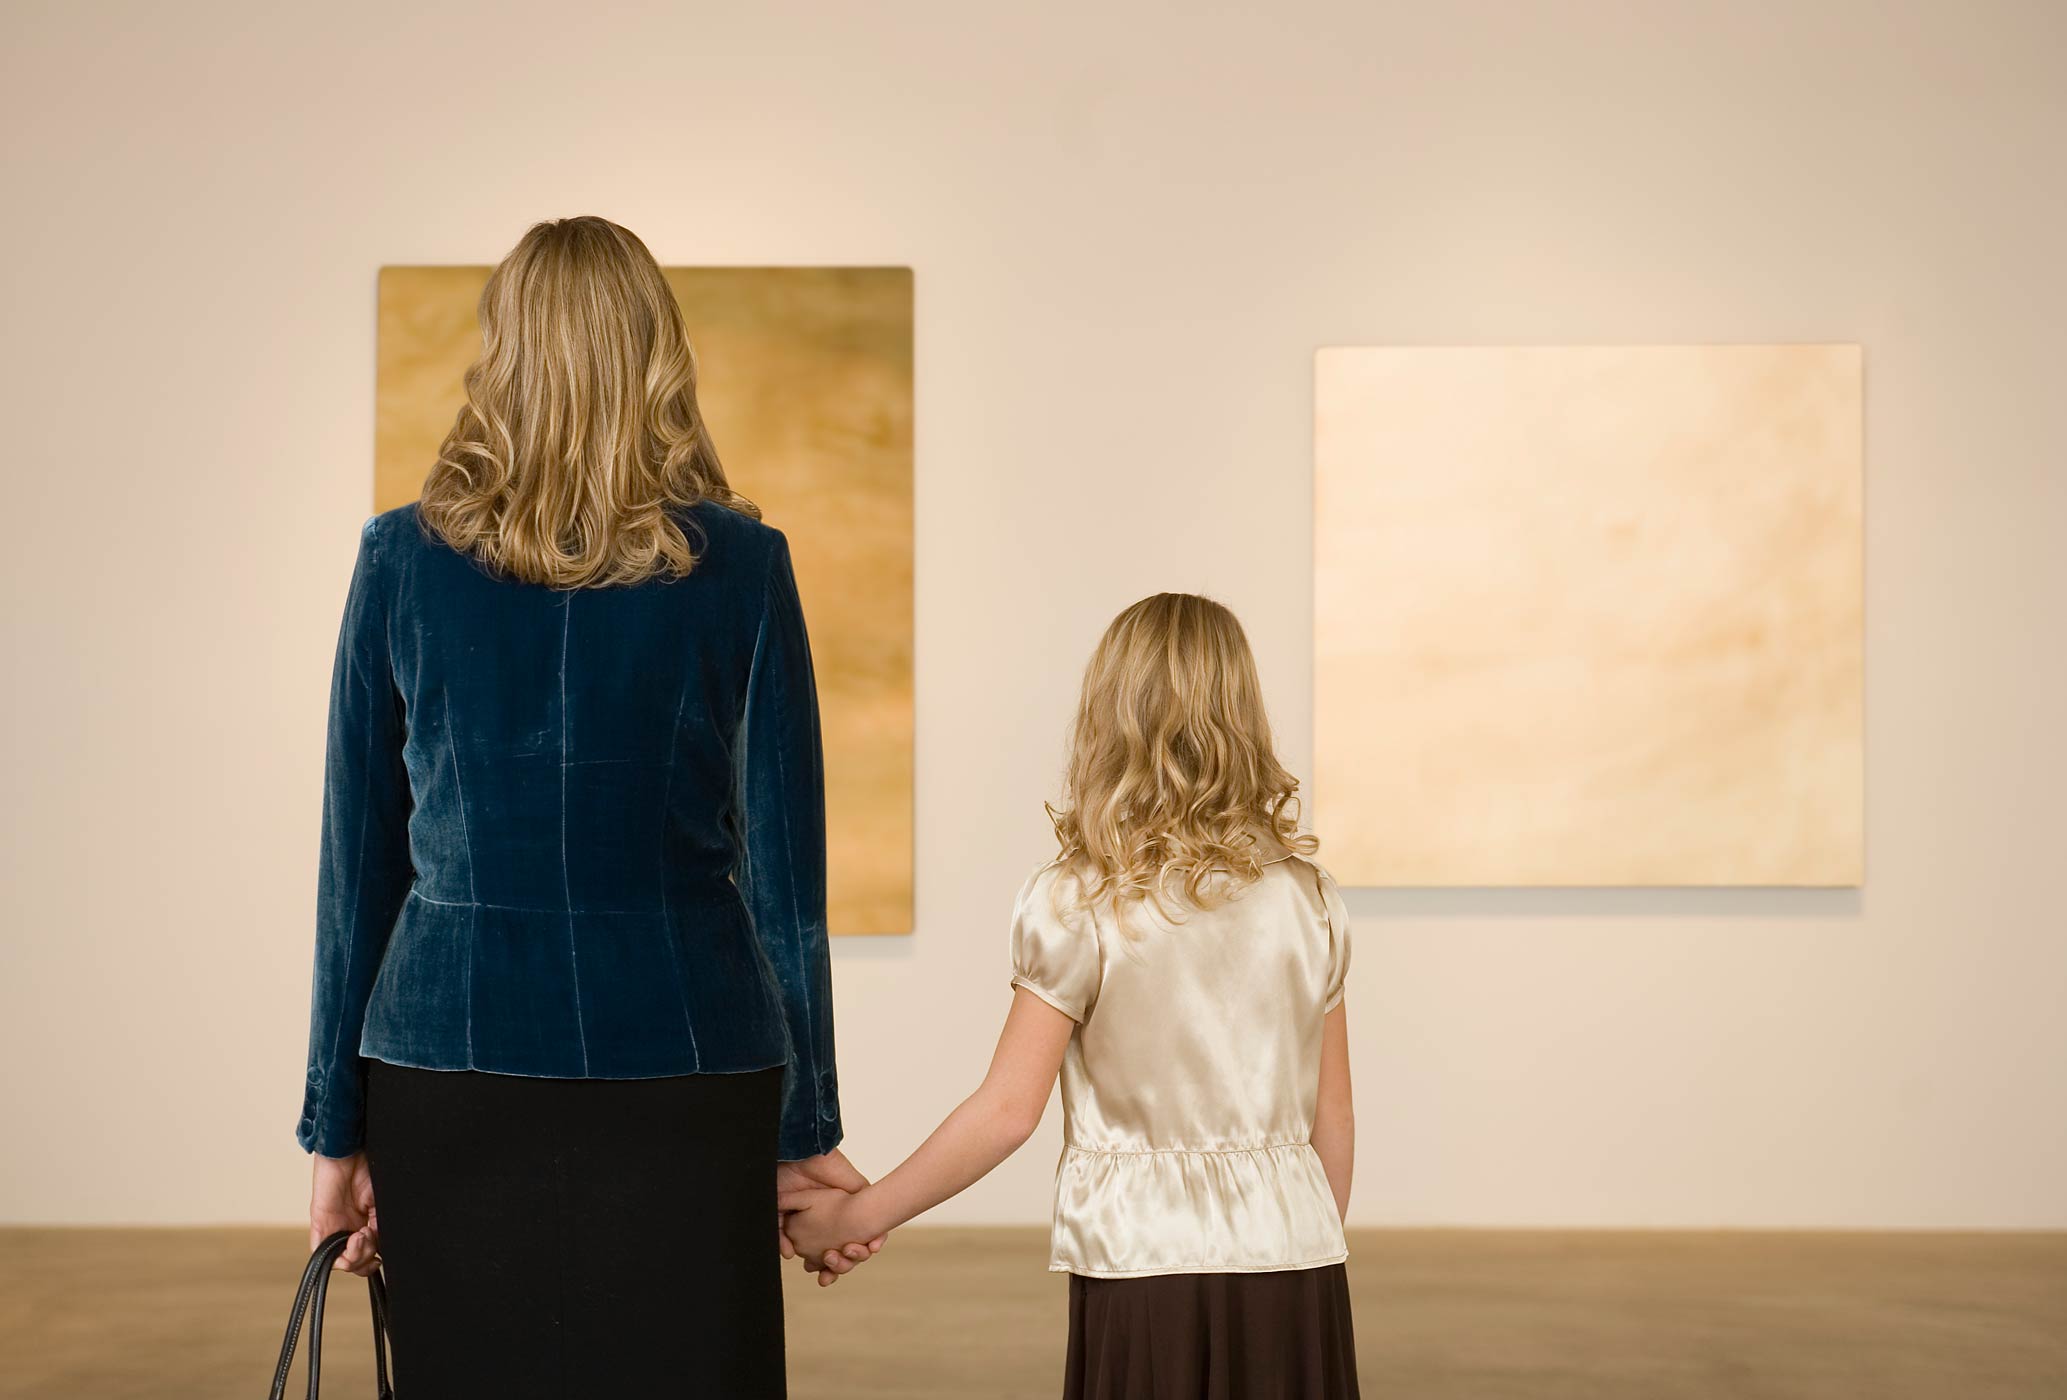 Mother and daughter in art gallery